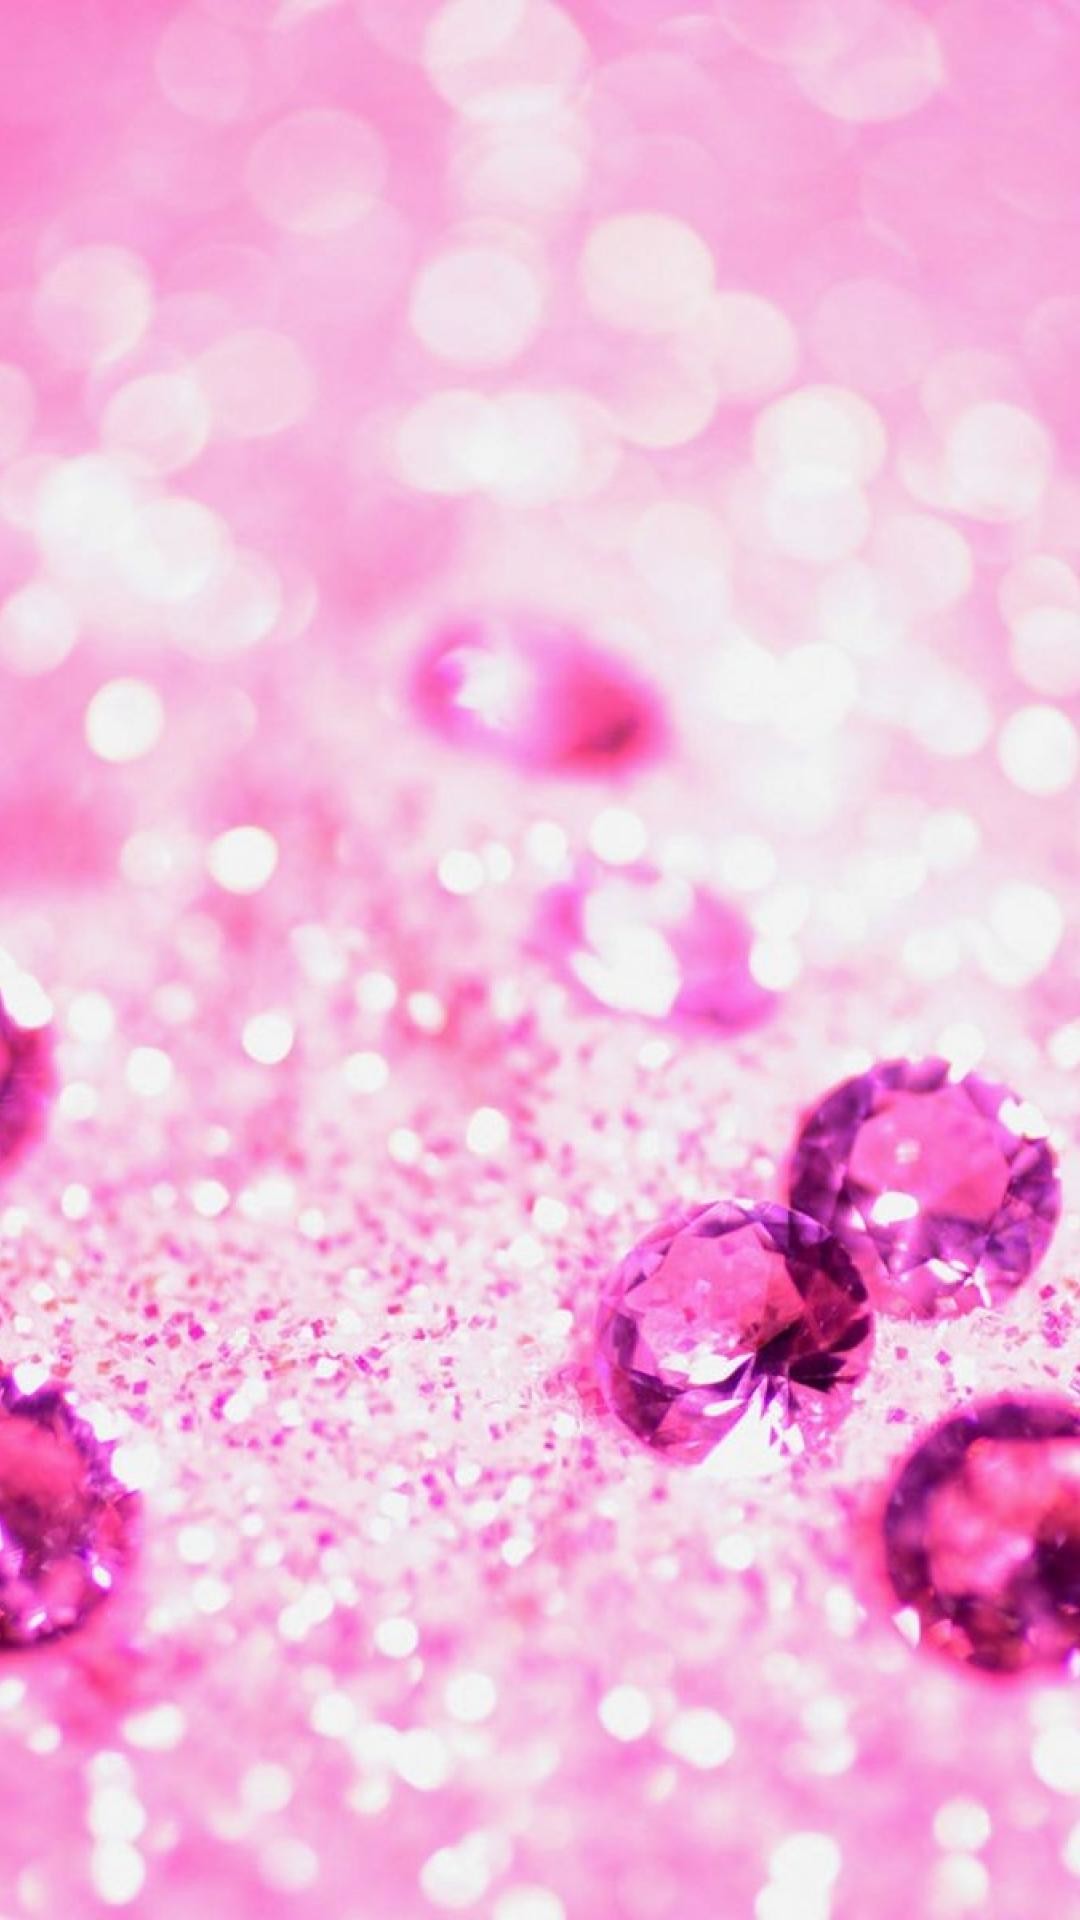 Lots of pink jewelry Girly glitter iPhone wallpapers